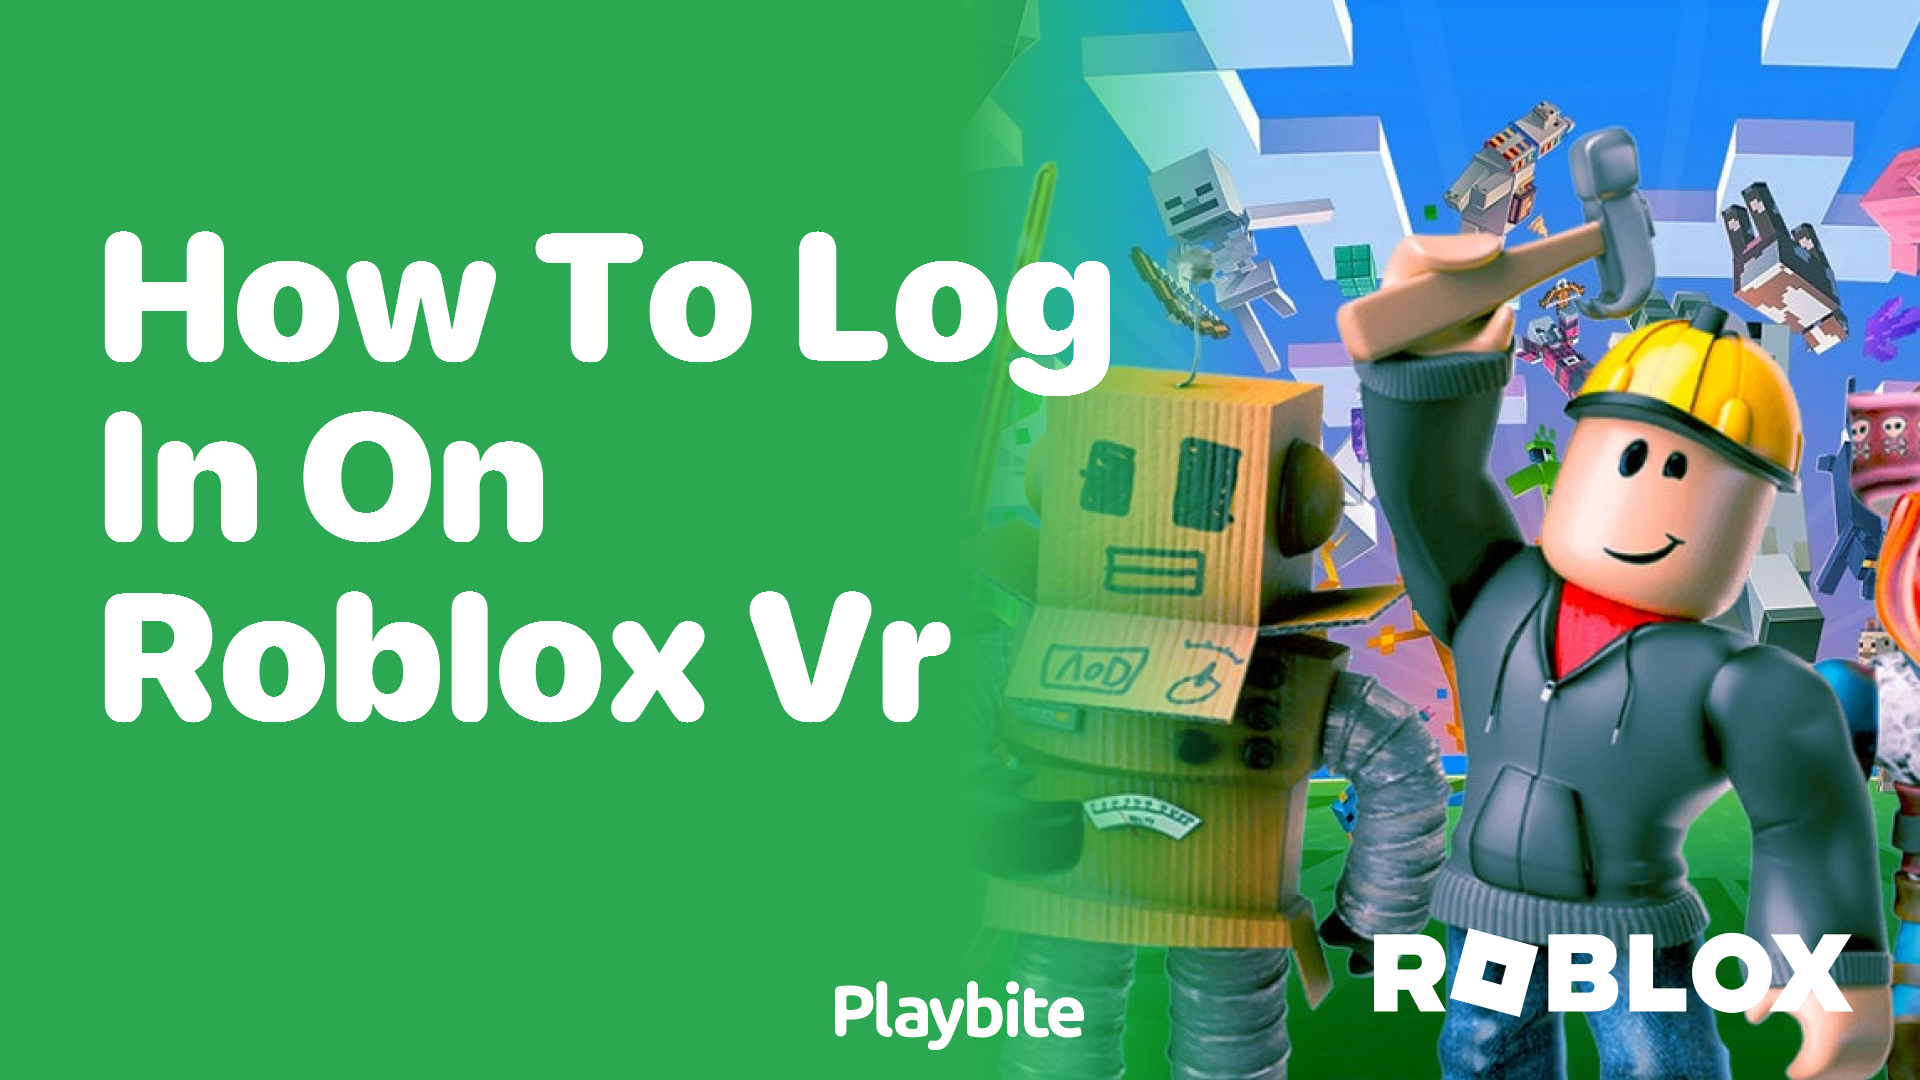 How to Log In on Roblox VR: A Simple Guide